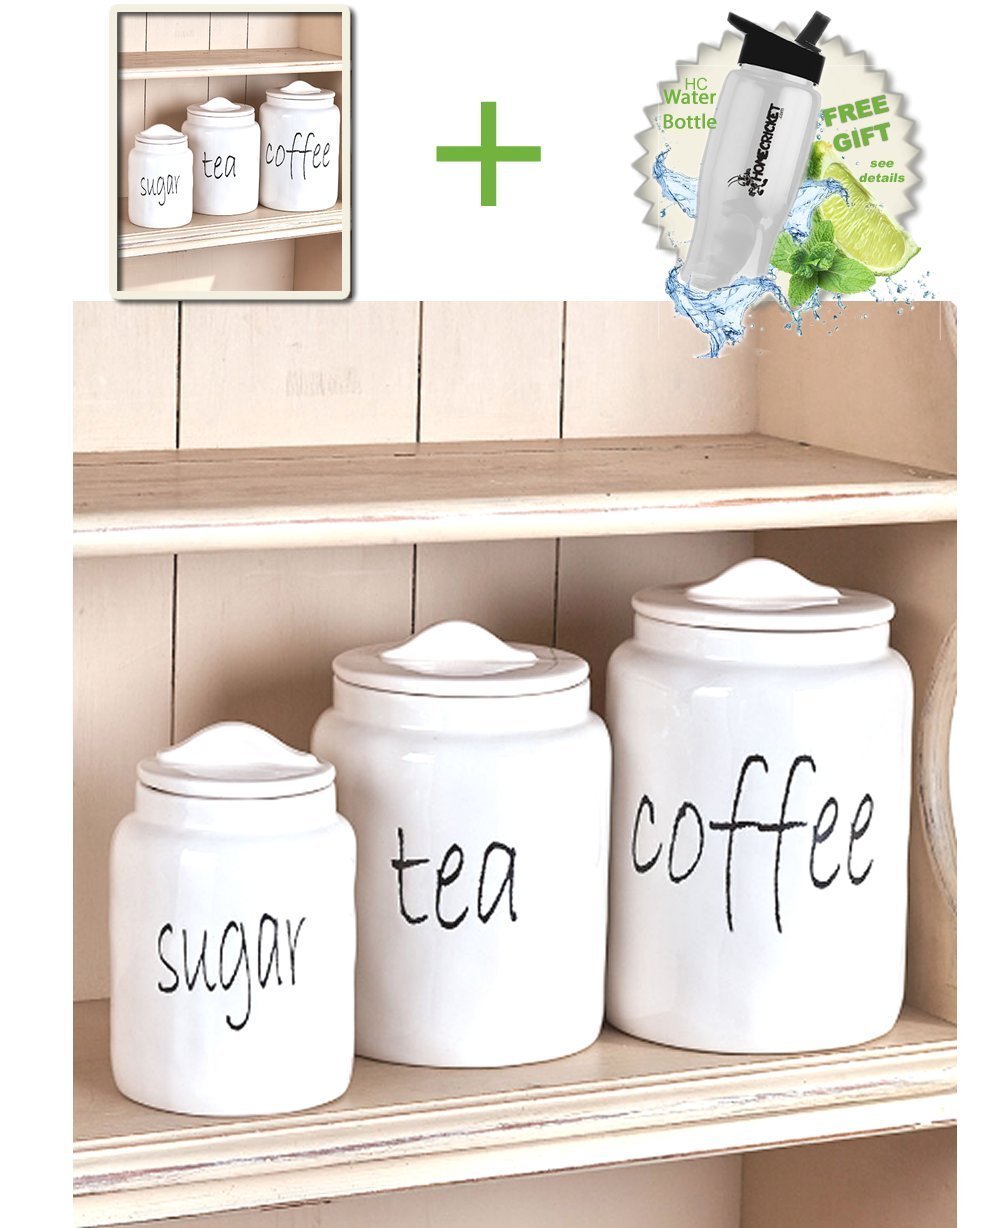 Save gift included white farmhouse kitchen countertop sugar tea coffee canister set free bonus water bottle by home cricket homecricket